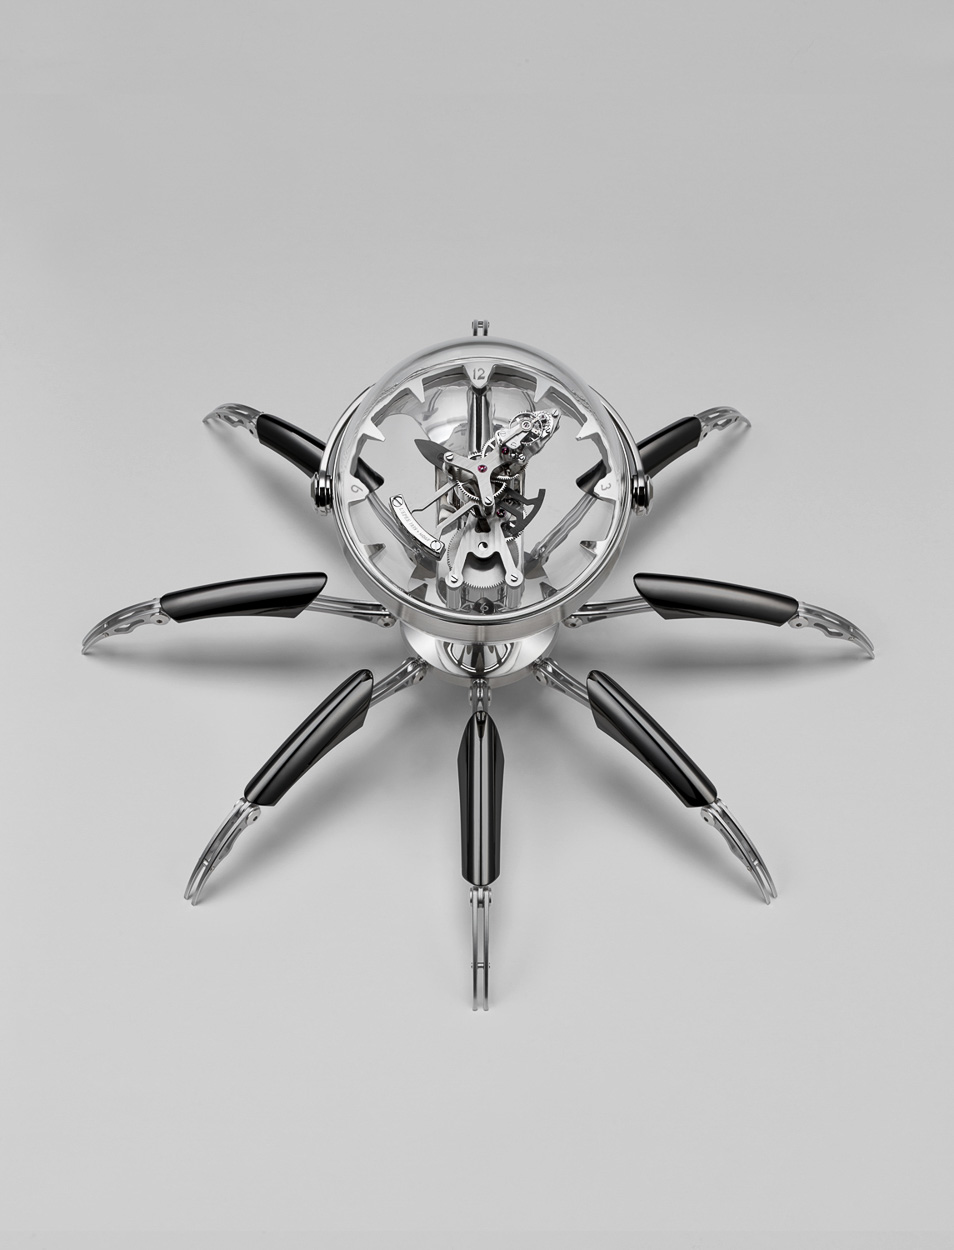 MB&F presents their latest creation the Octopod table clock